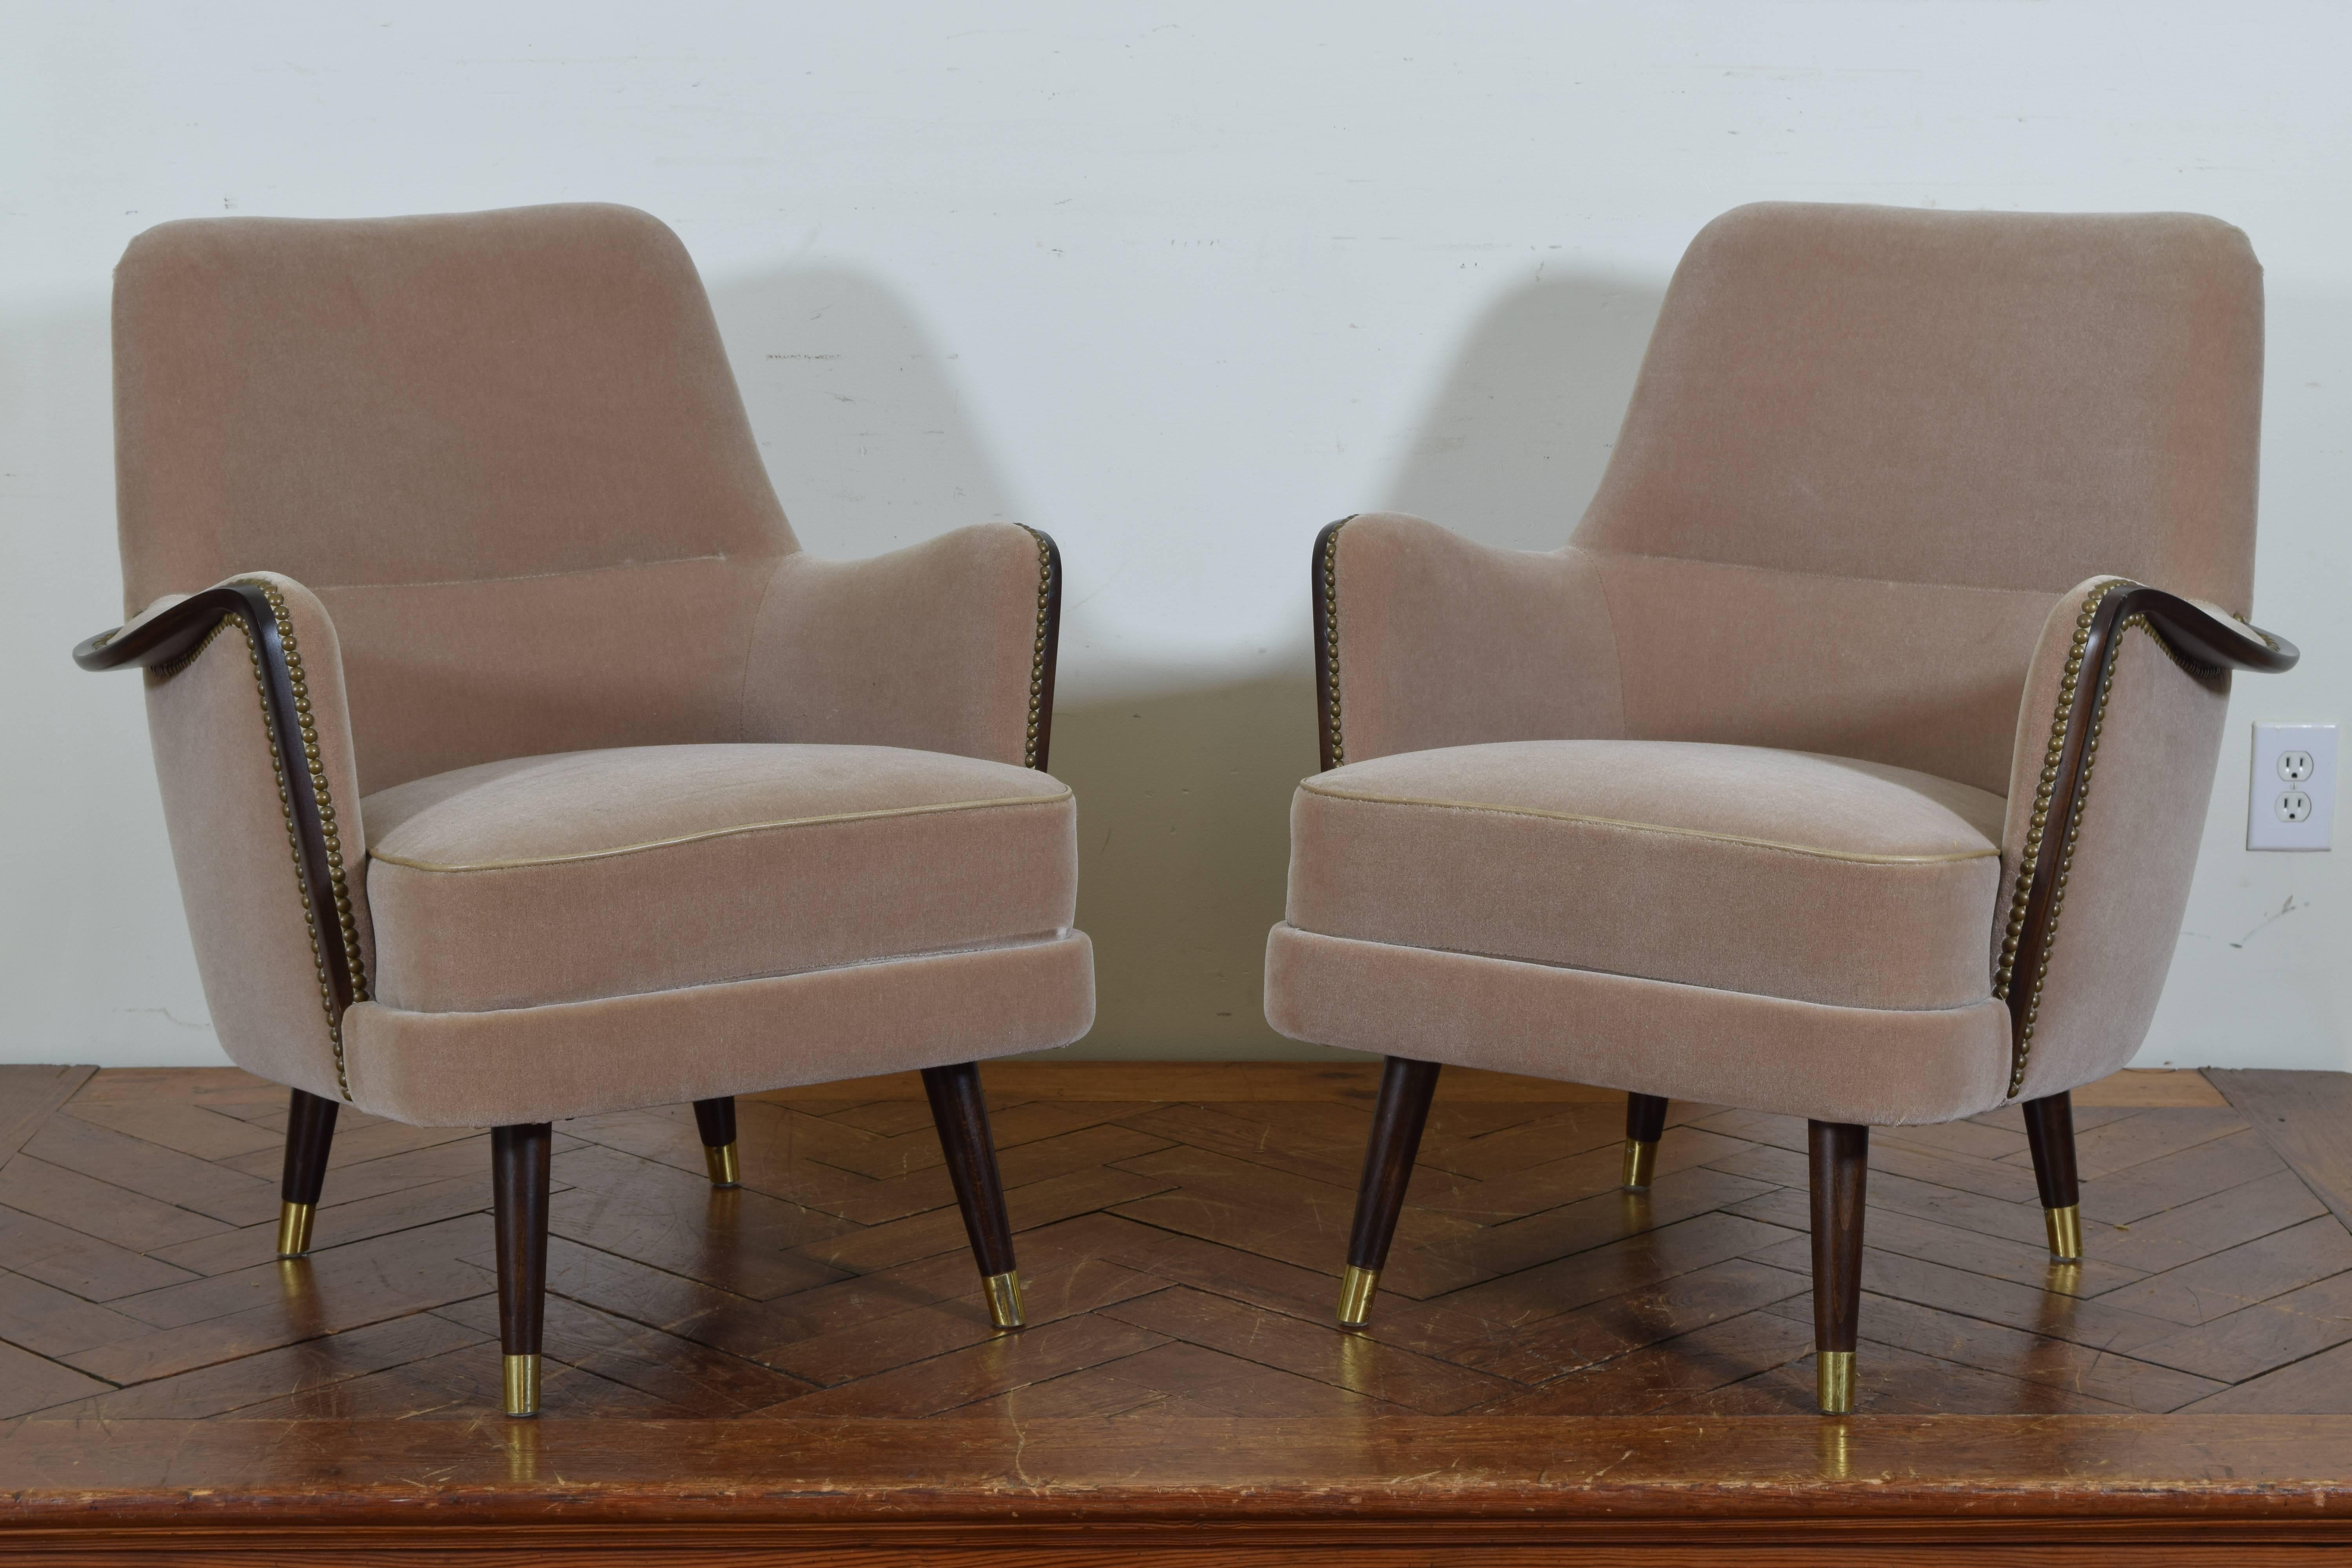 Having curved backs, the arms trimmed in mahogany, tapered legs with brass sabots.